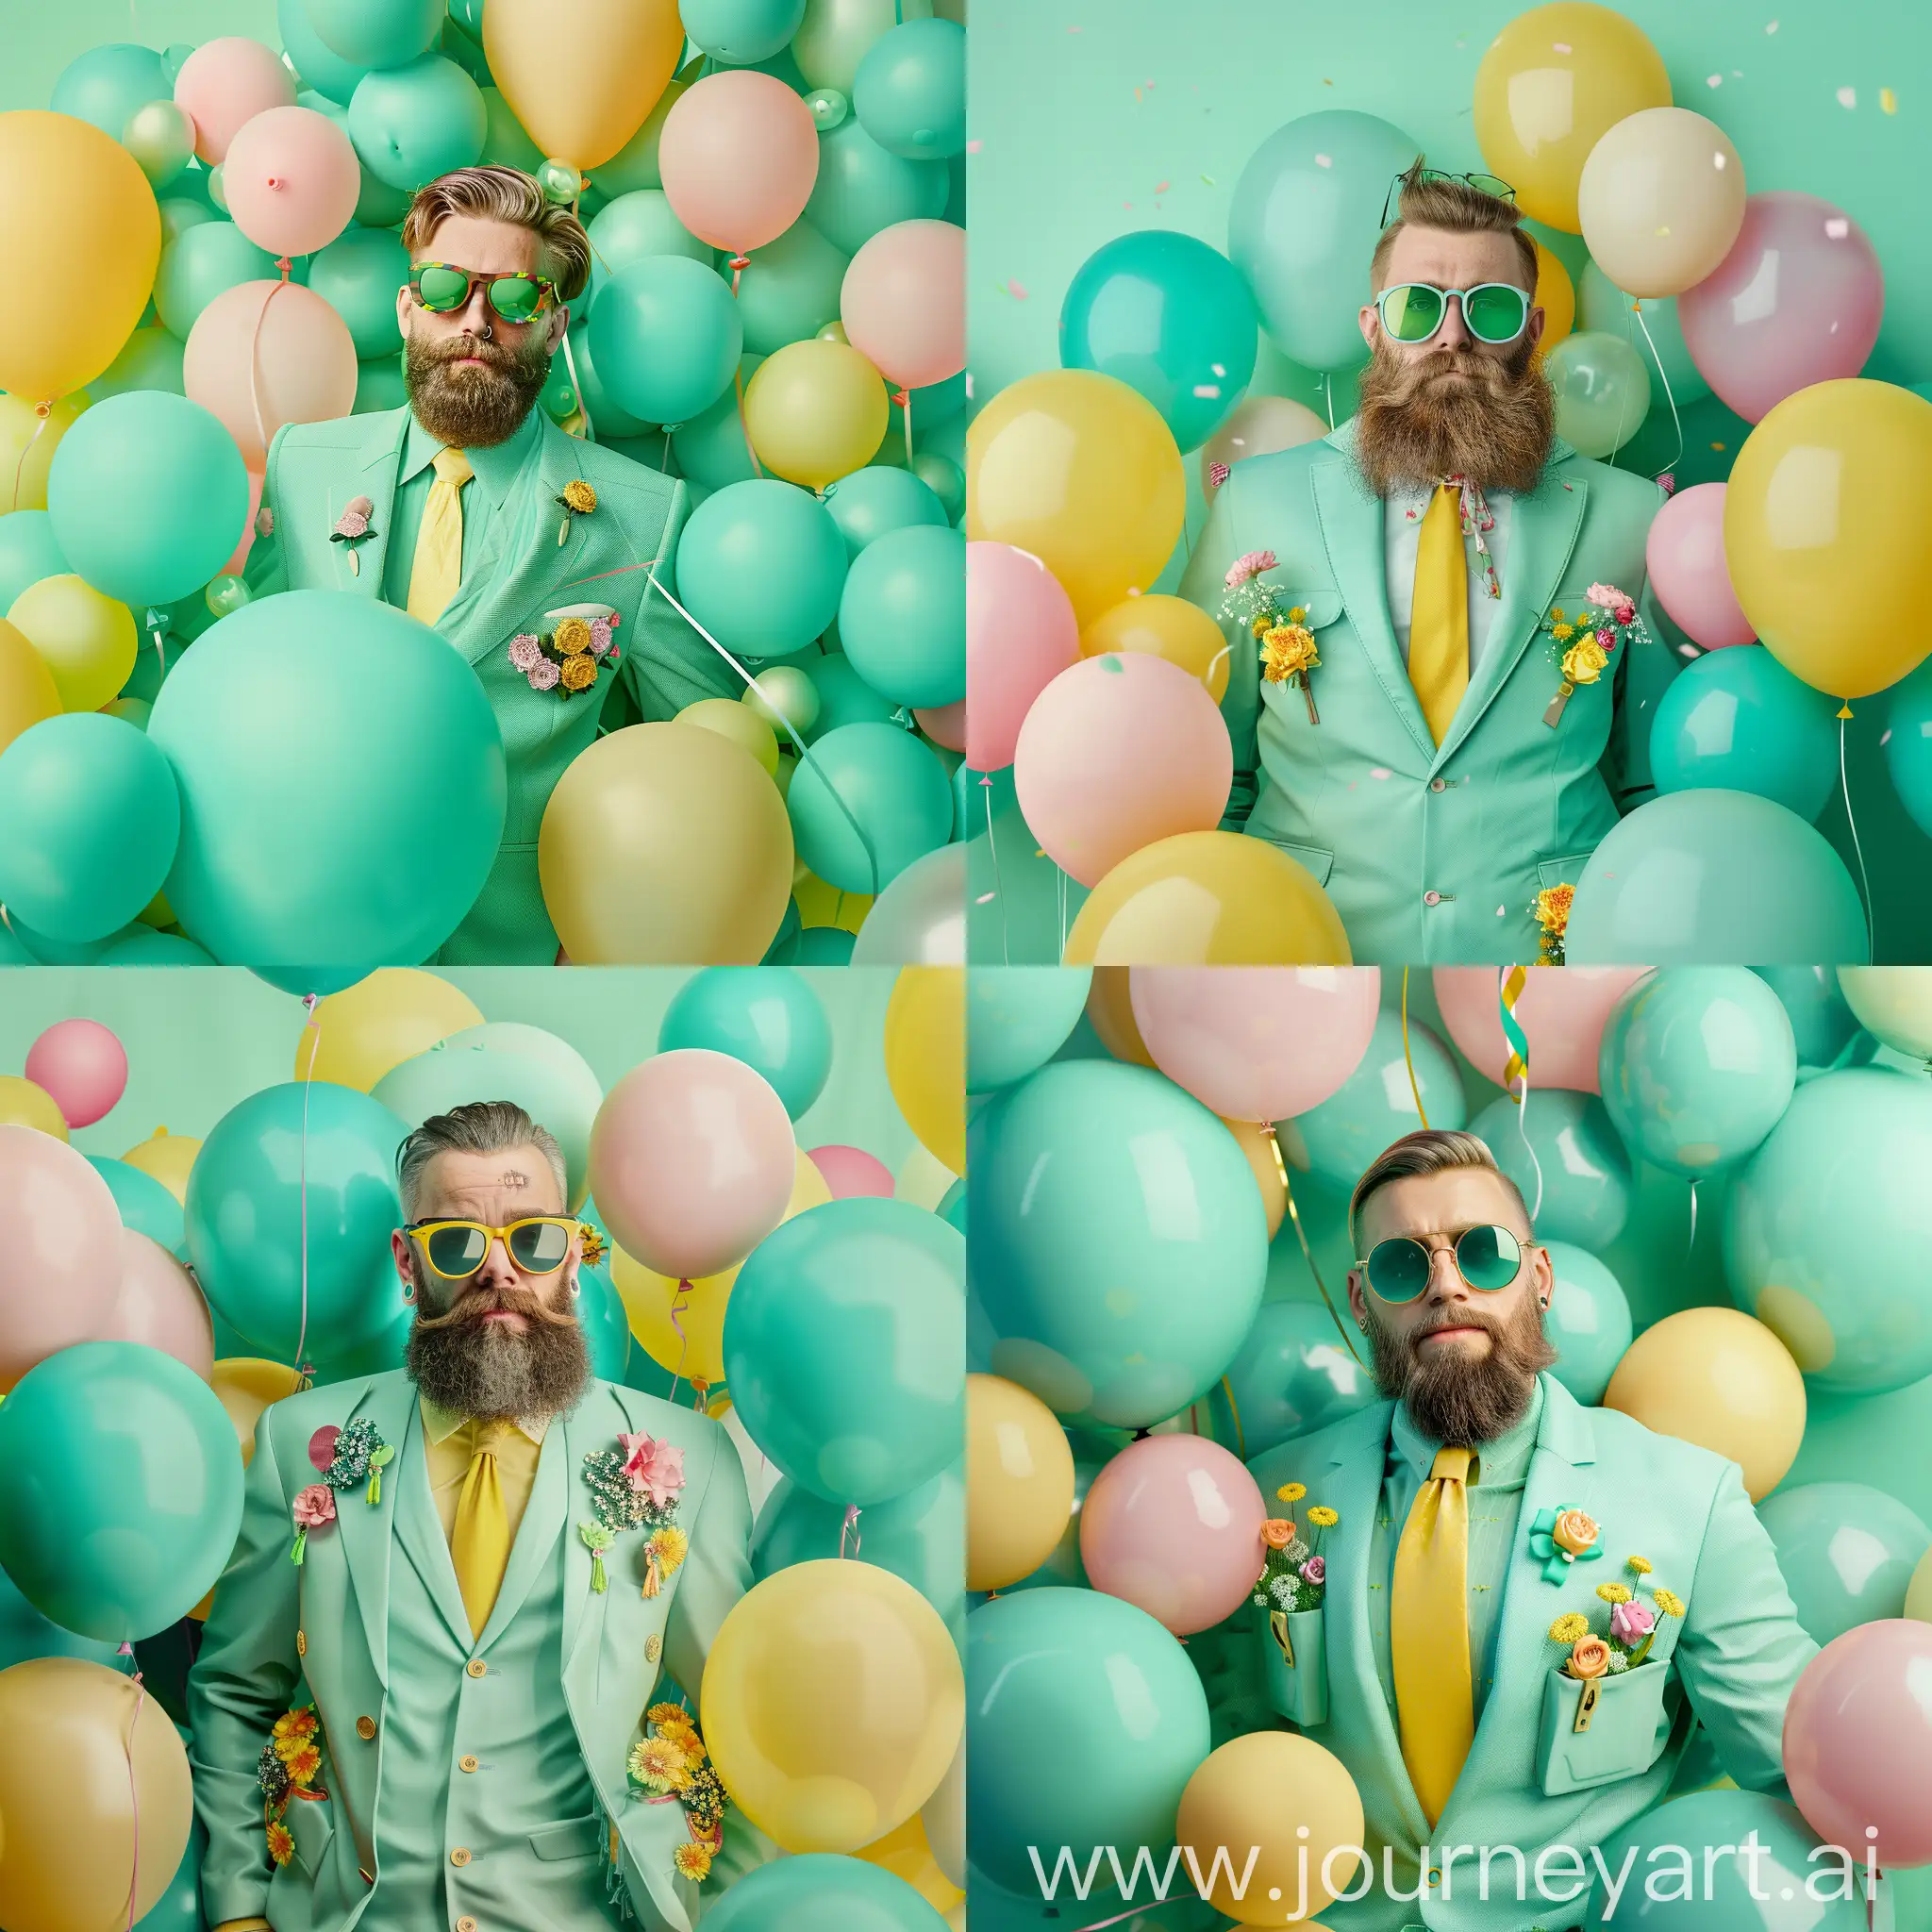 FESTIVE white male of russian descent with hipster beard in mint green party outfit with yellow tie, some flower decor on his jacket pockets in stylish suglasses surrounded by crazy amount of teal, pink and yellow balloons, on minimalistic mint green background, full body height, extremely photorealistic